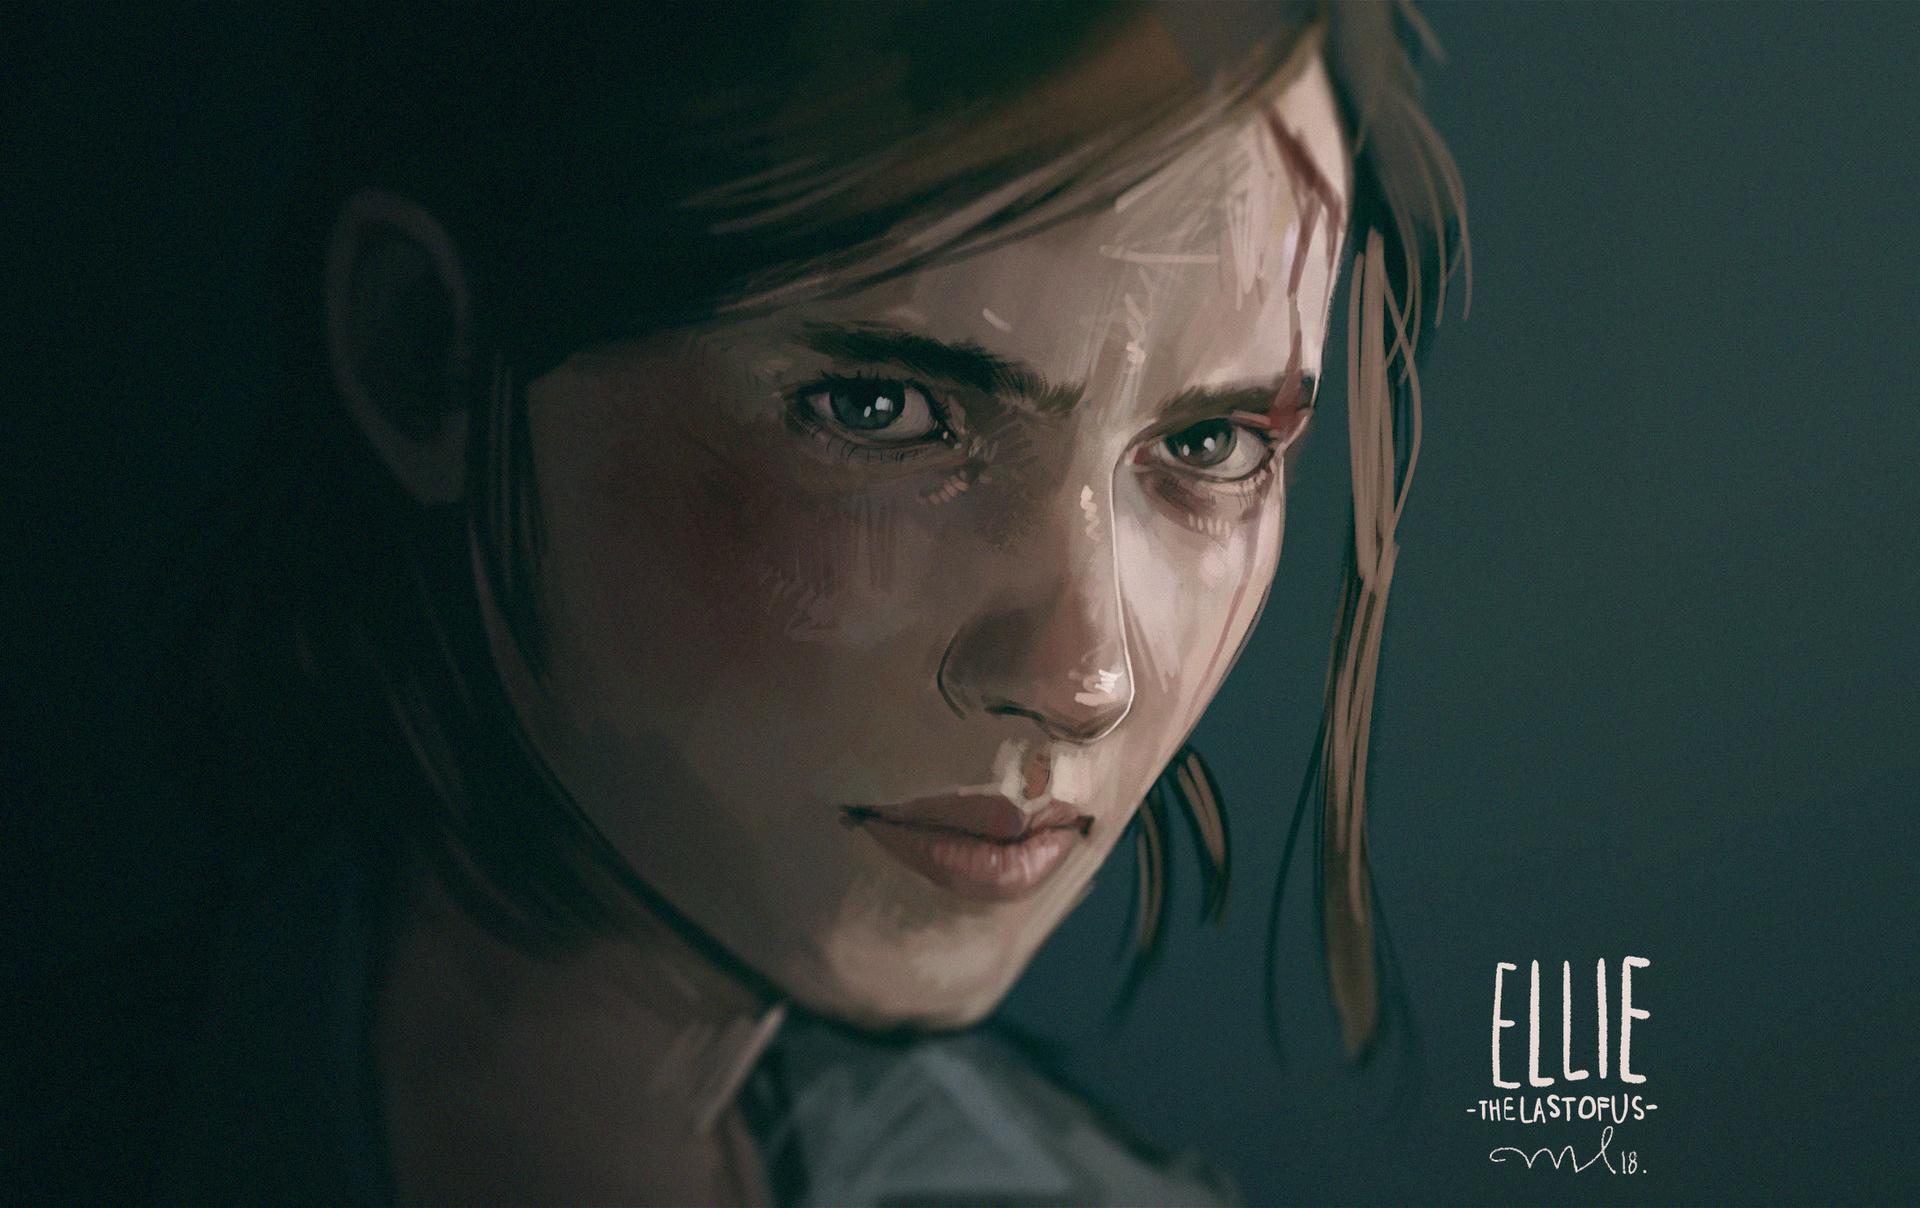 Wallpaper of Ellie, The Last of Us Part II, Video Game background